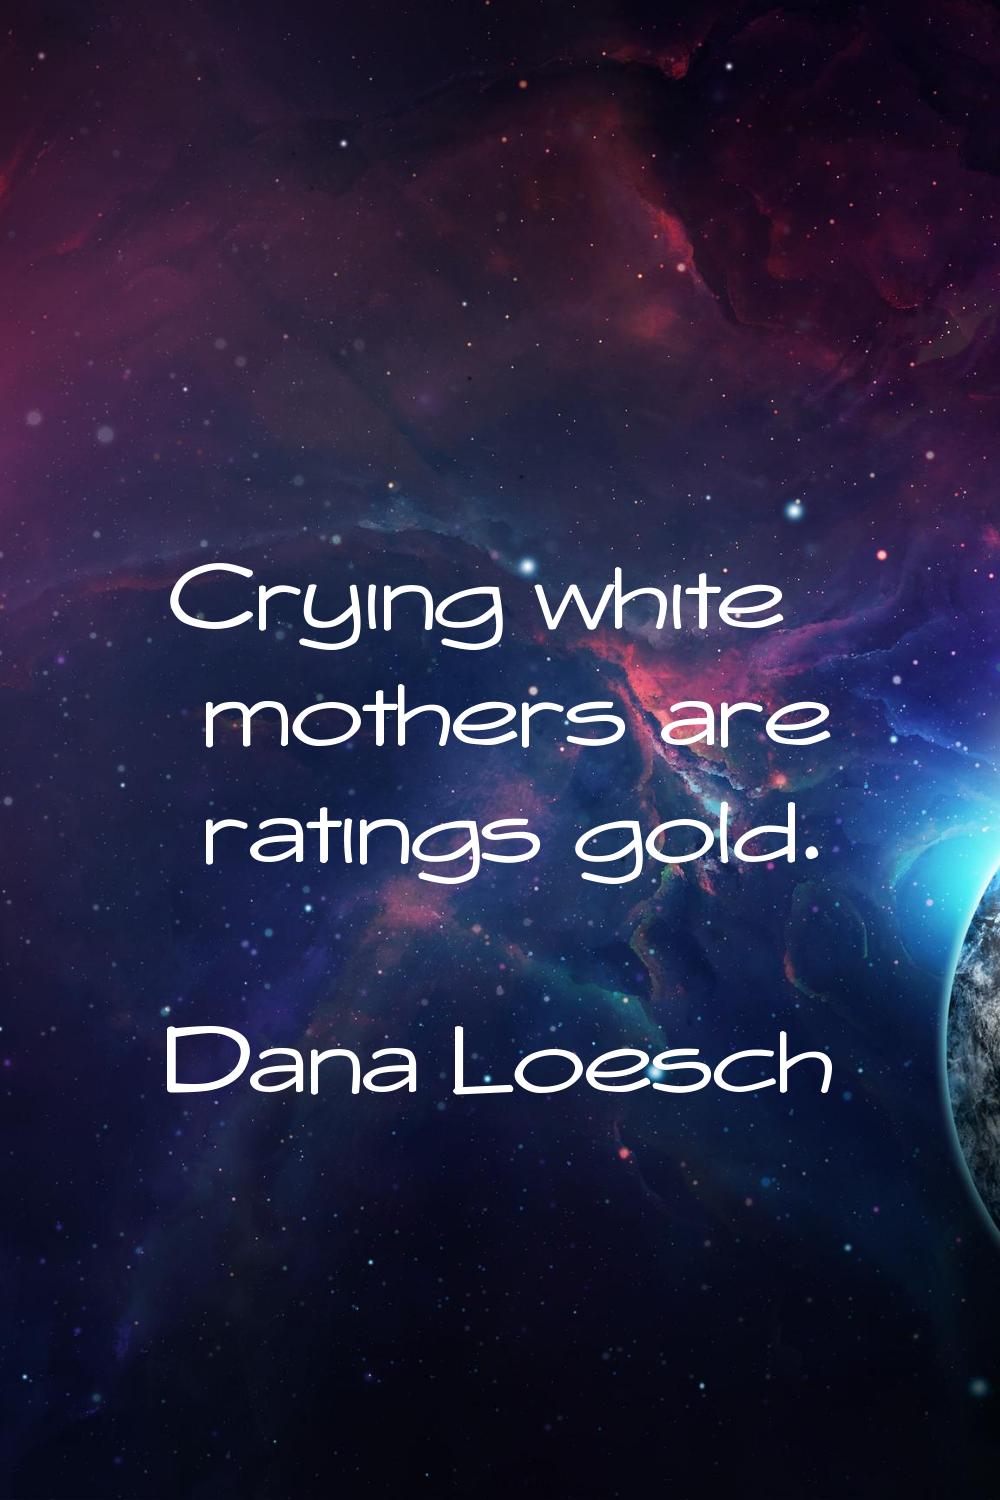 Crying white mothers are ratings gold.